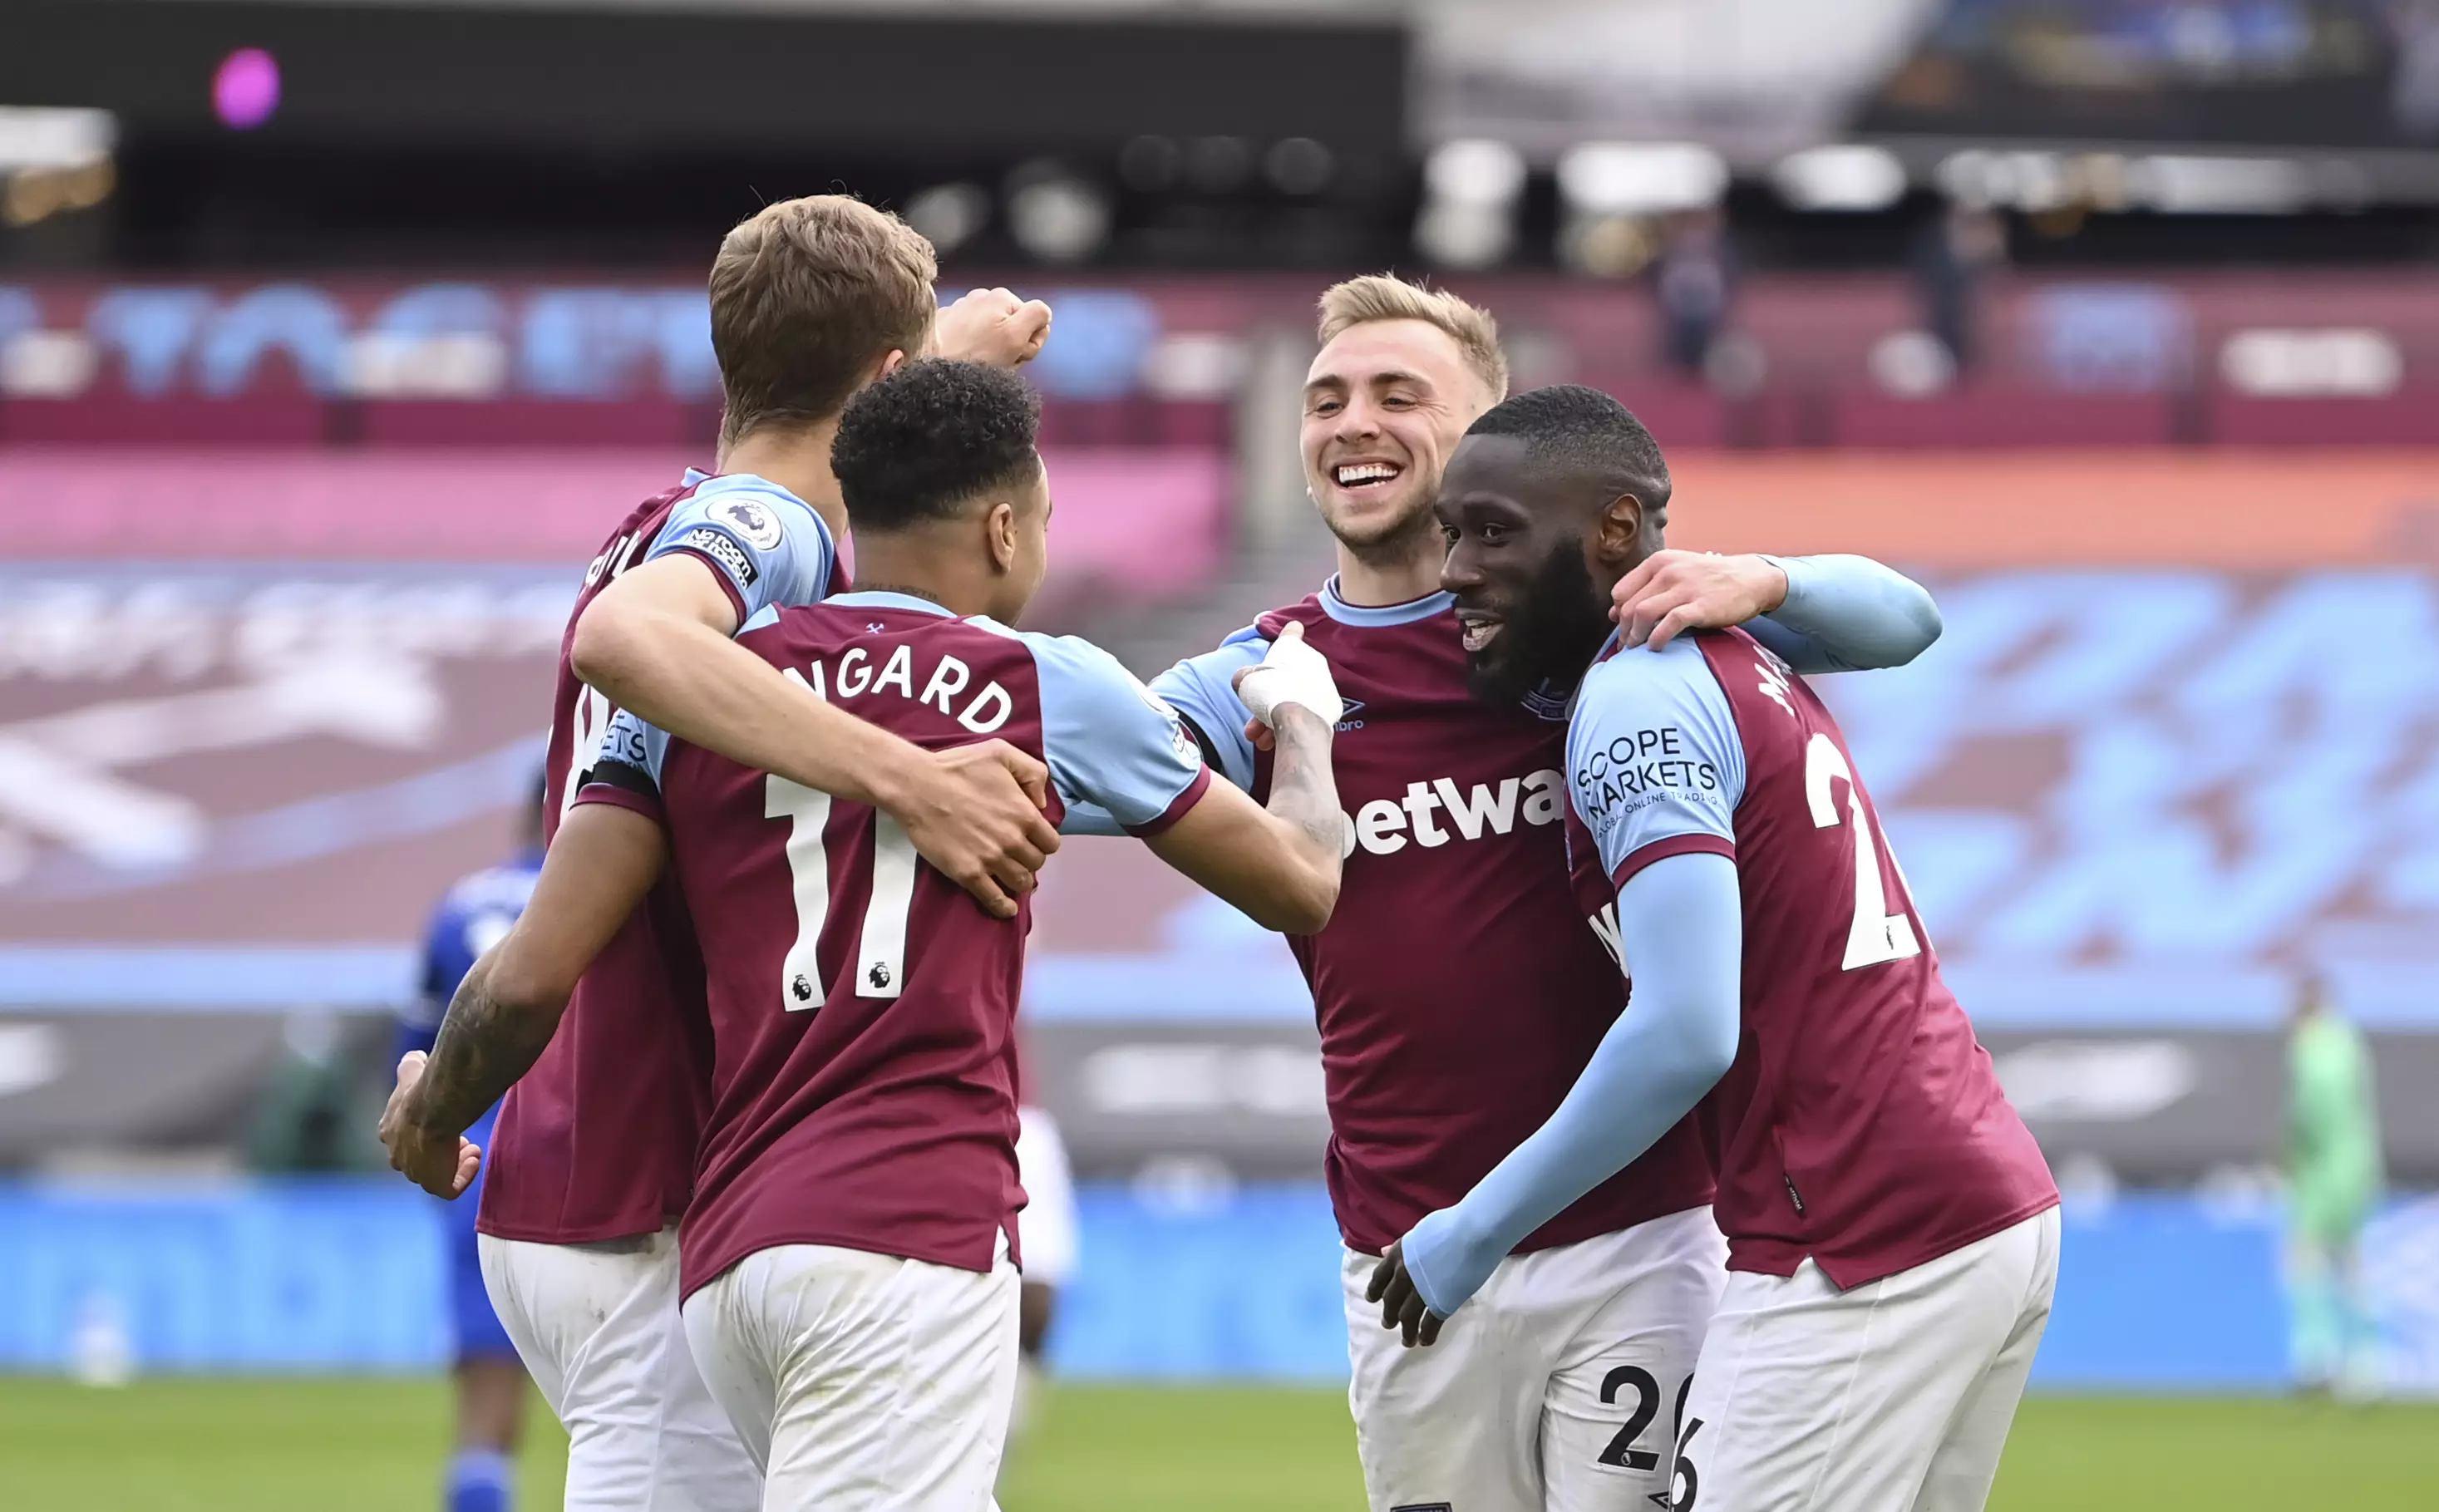 West Ham players celebrate their third goal on Sunday. Image: PA Images